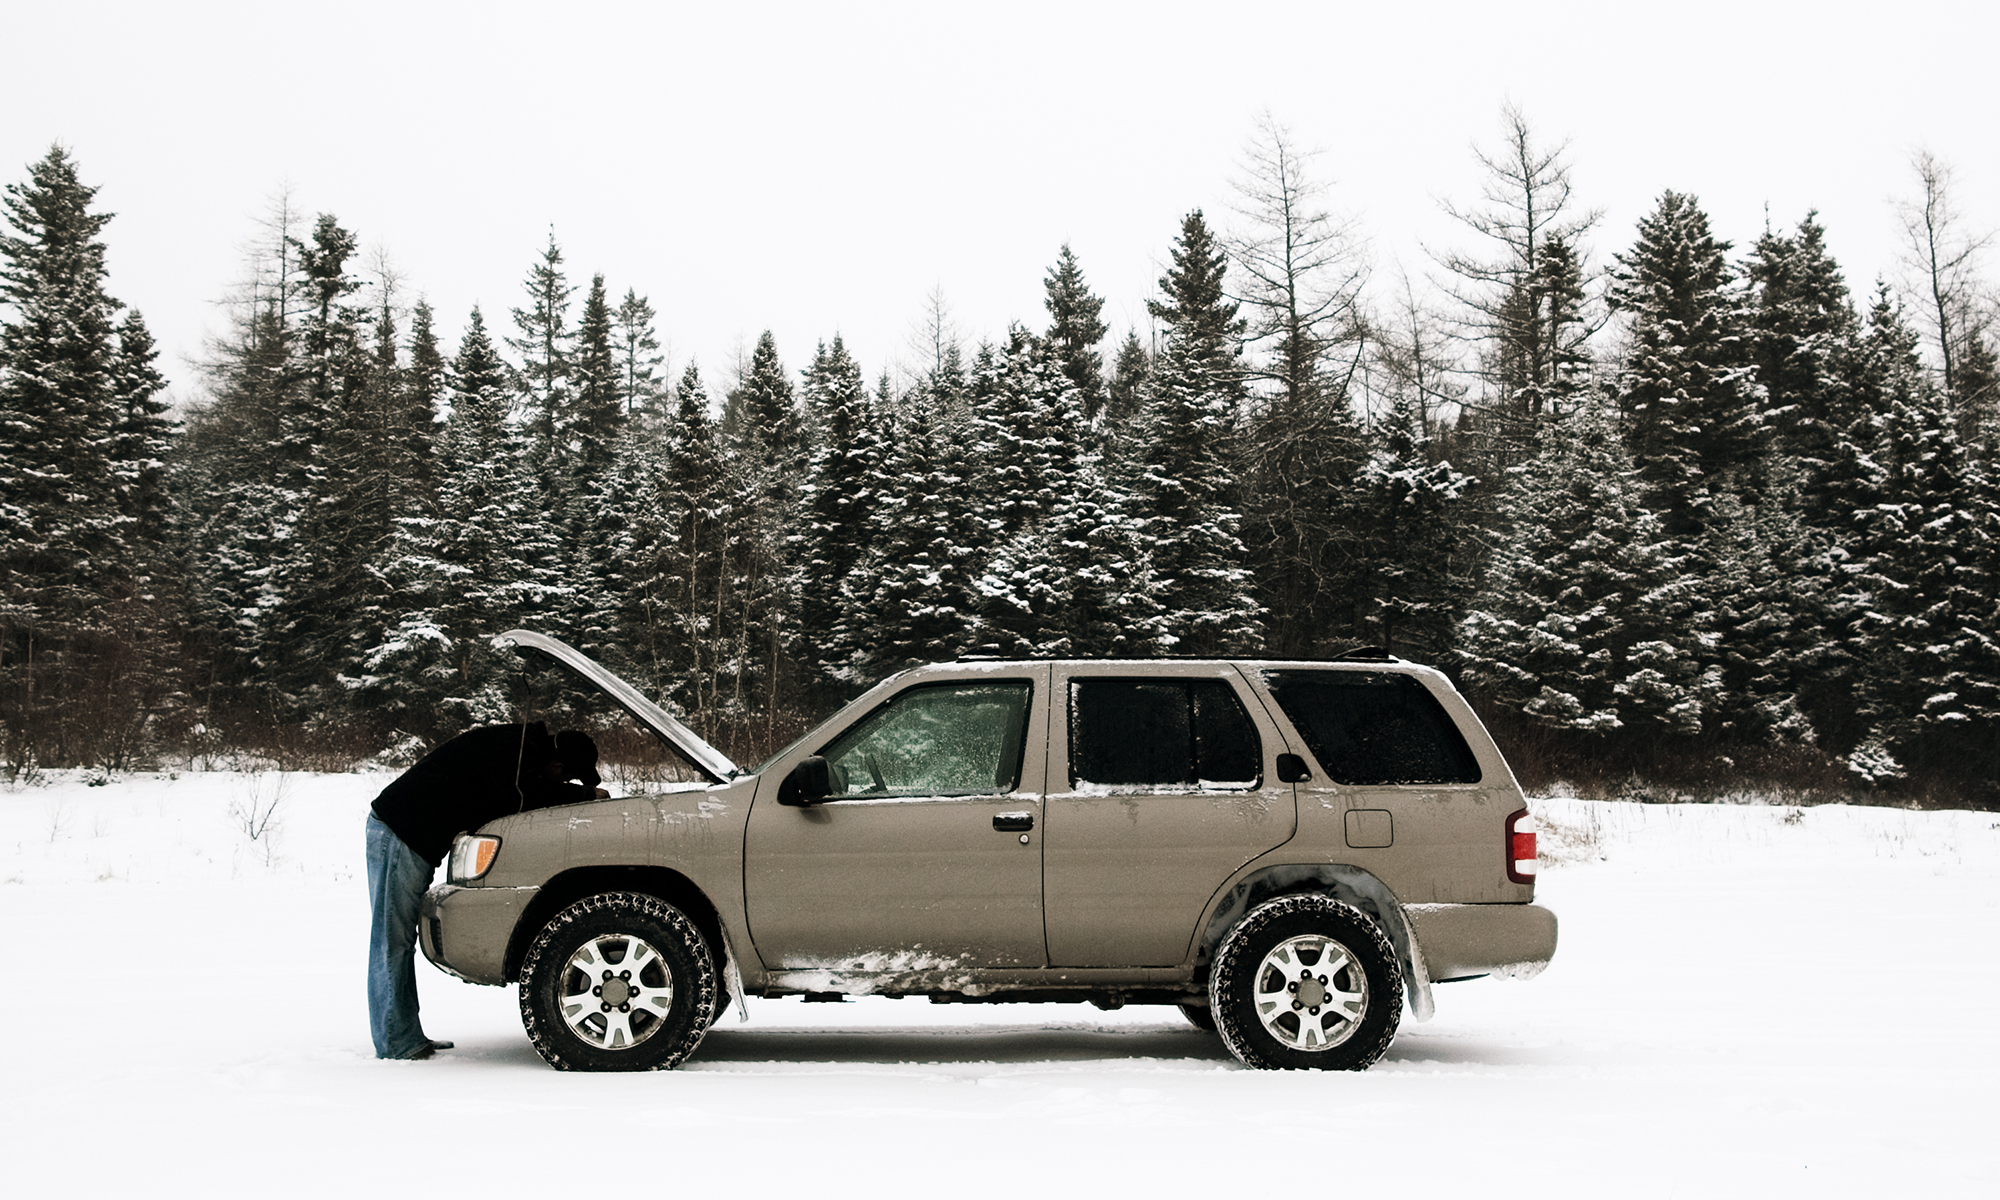 A car owner looking under the hood of their tan SUV in the middle of a snowy field with trees behind them.